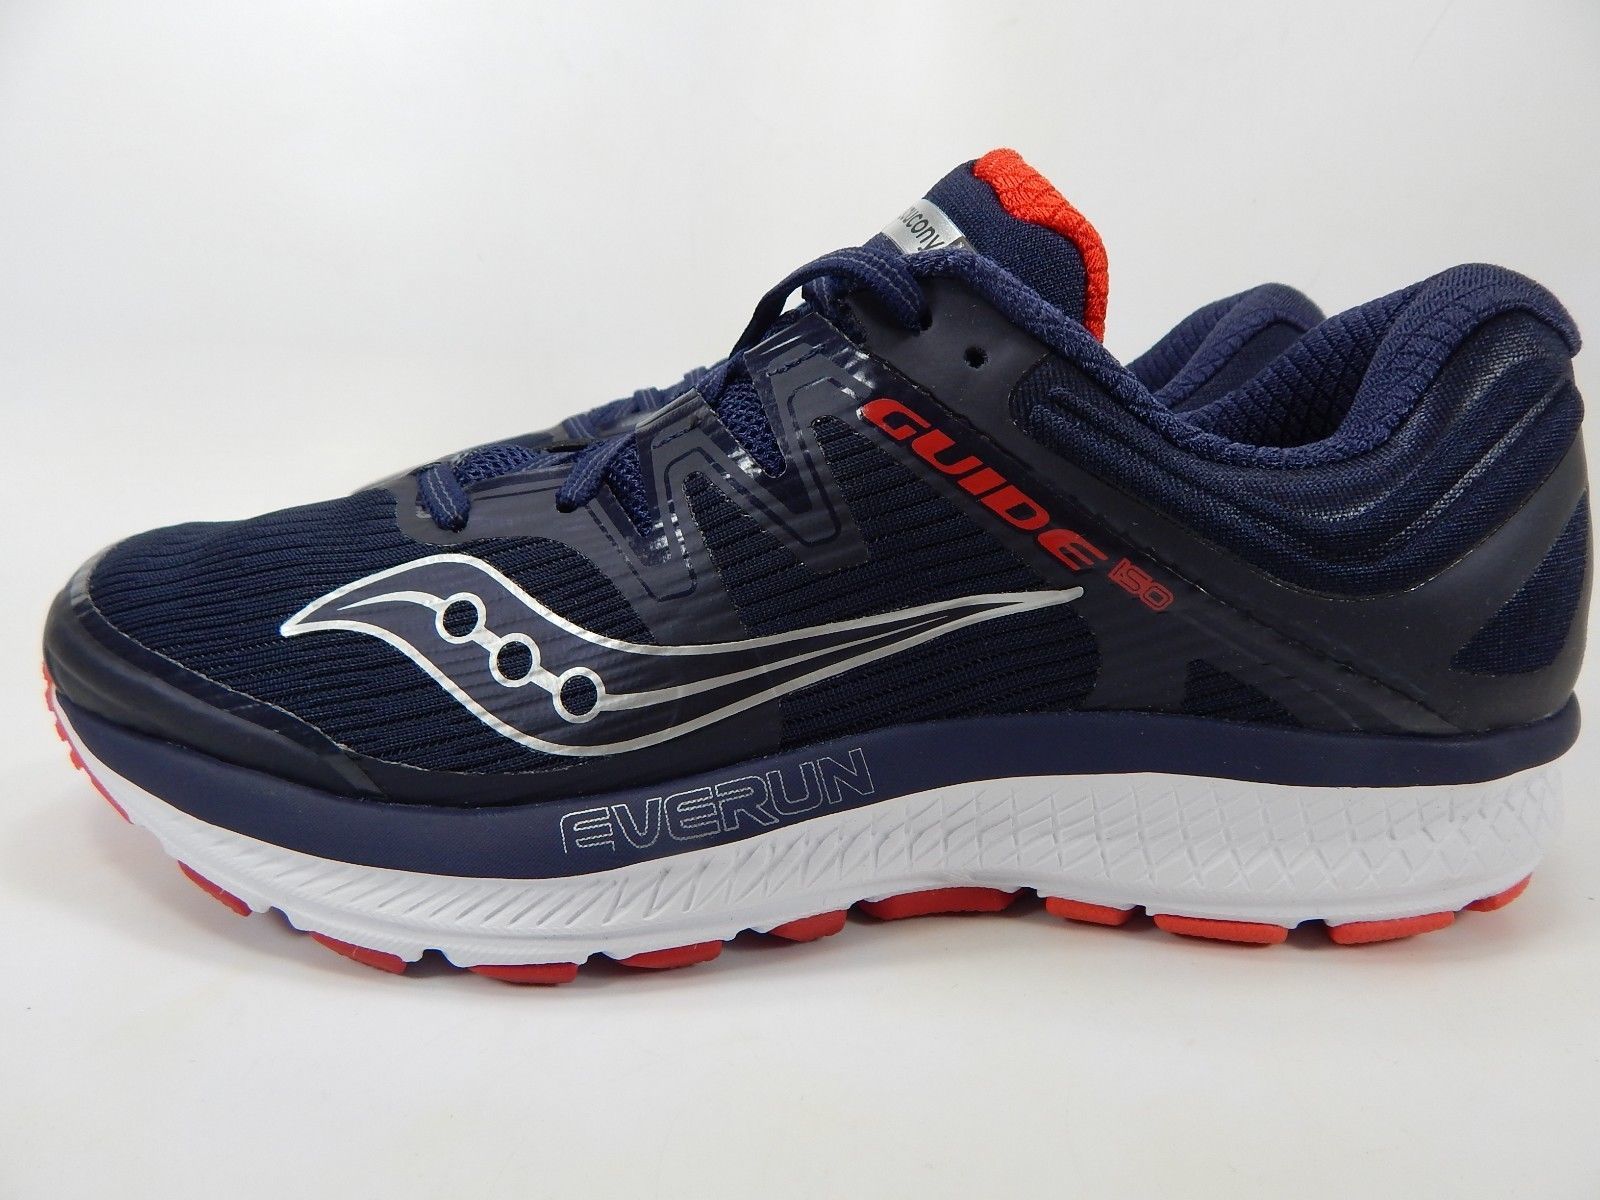 Saucony Guide ISO Size US 9 M (D) EU 42.5 Men's Running Shoes Red Navy ...